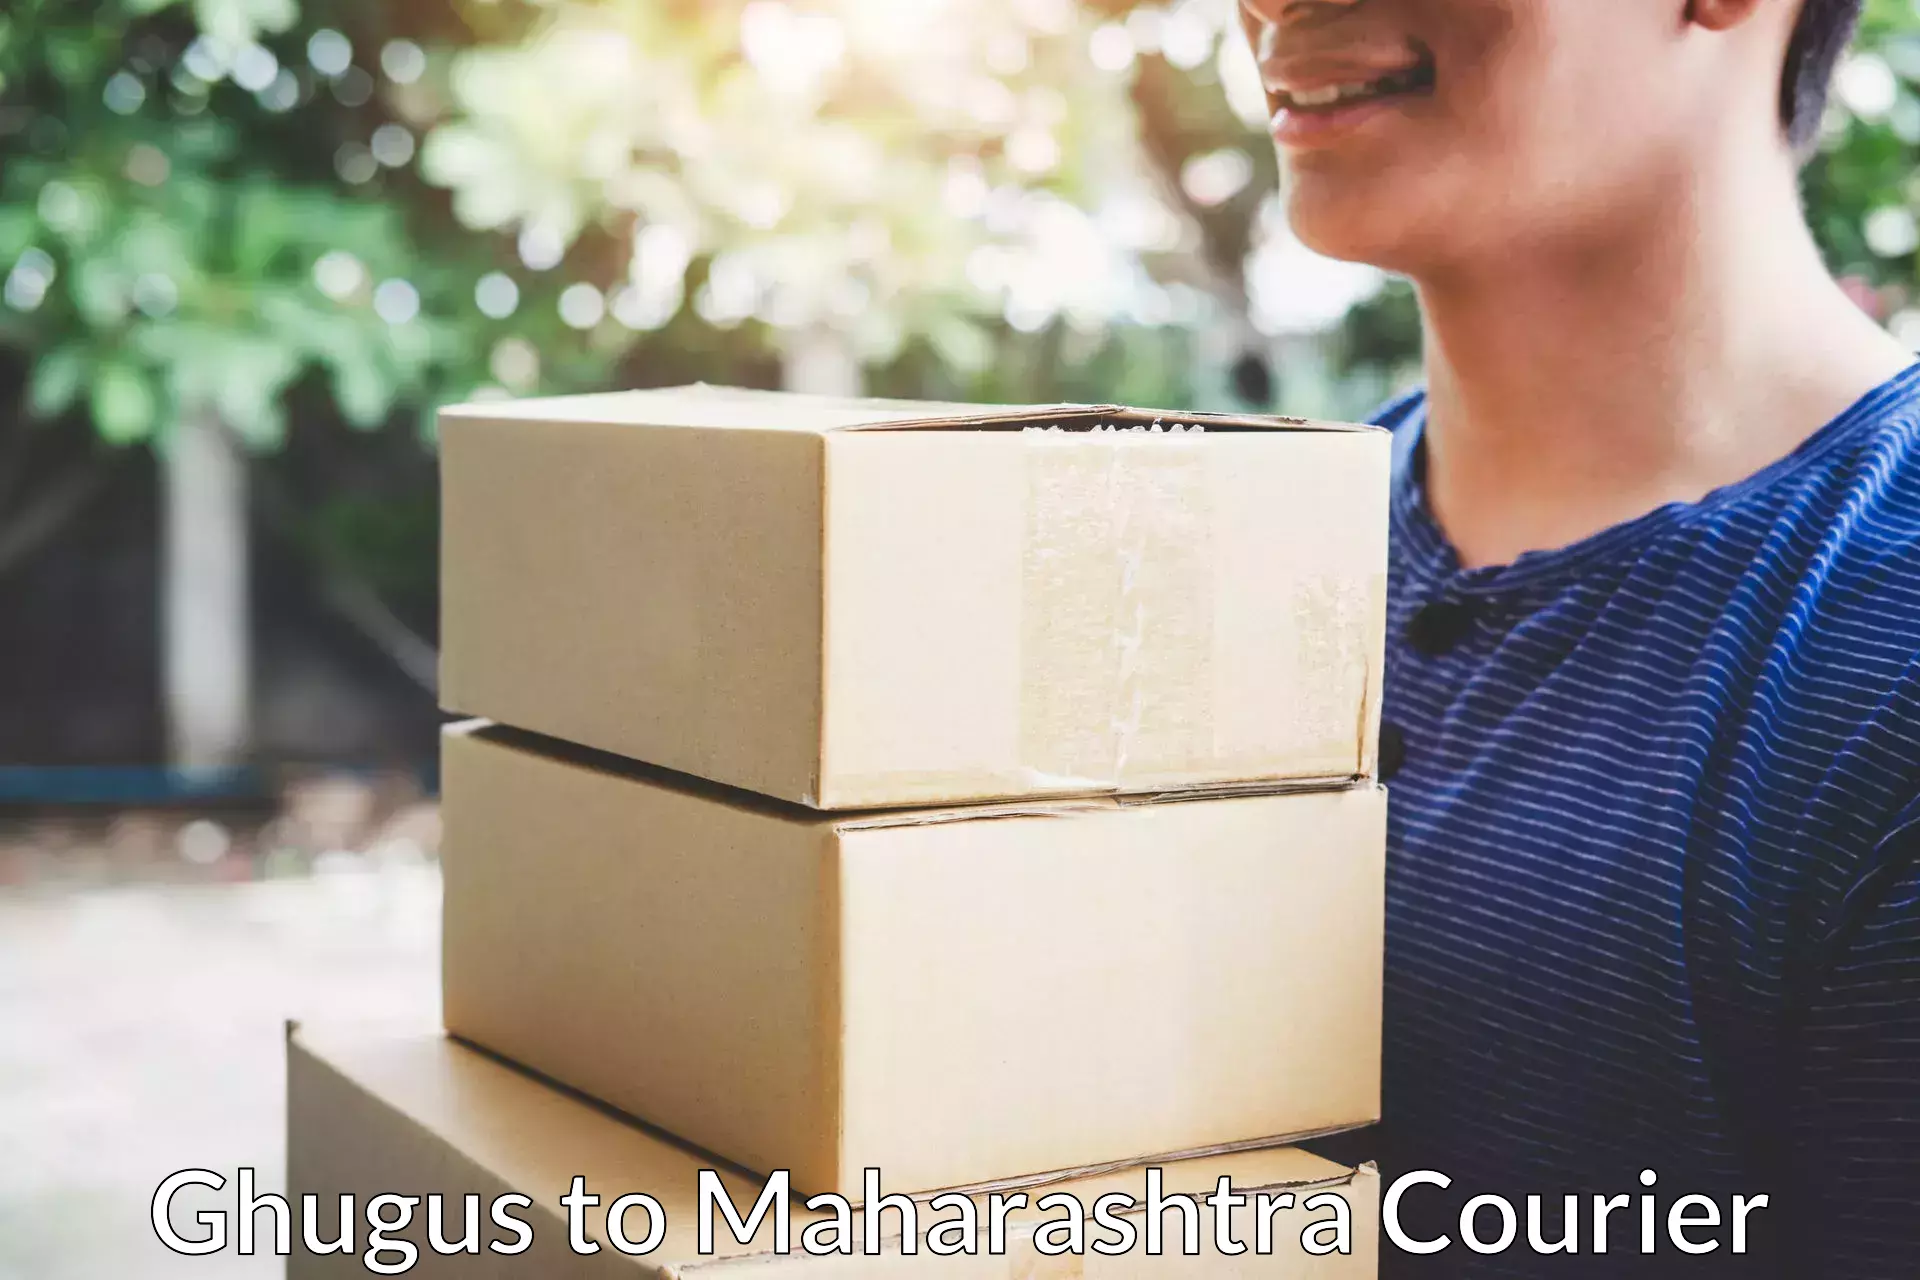 Quality moving and storage in Ghugus to Manjlegaon